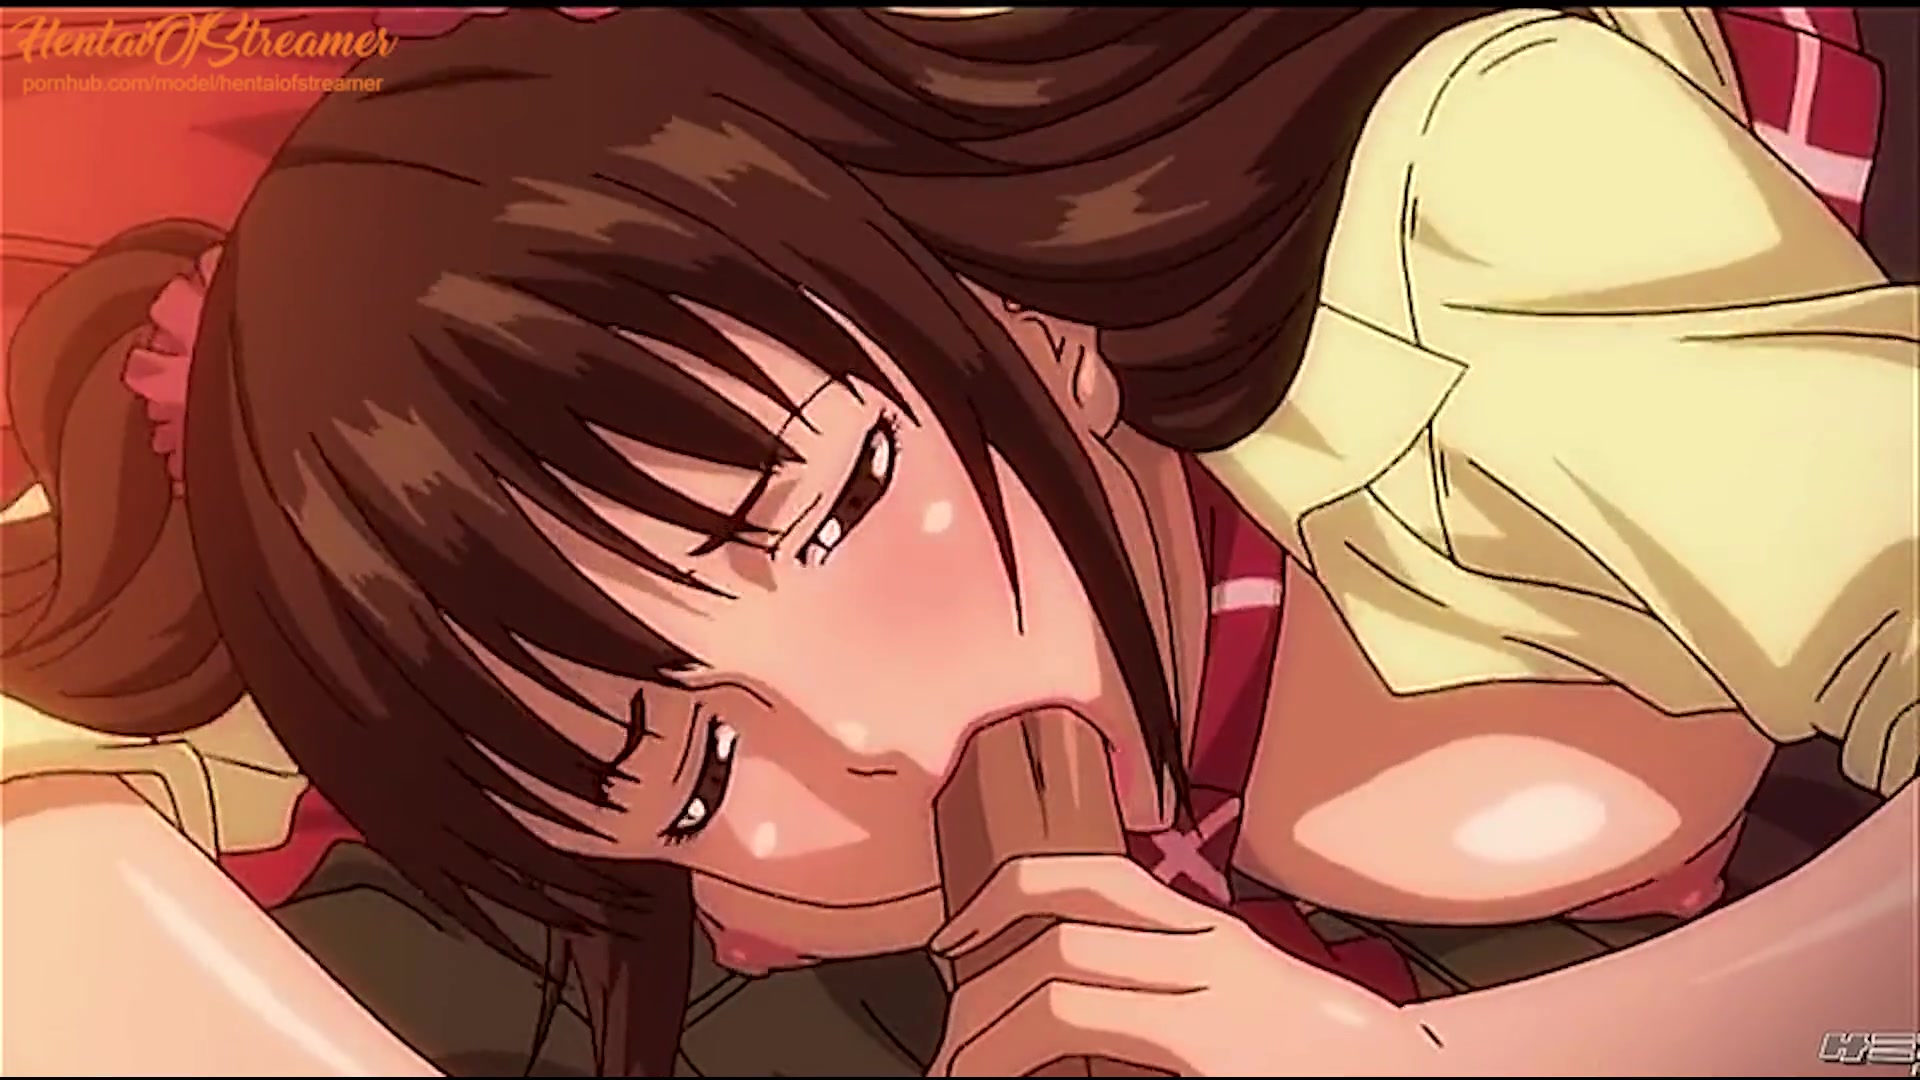 Uncensored Anime Hardcore Orgy - Anime Porn Uncensored | Hotwife Dude Sees his Gf Plumb and Deep-Throat off  another Stud | Anime Porn, Anime - uiPorn.com